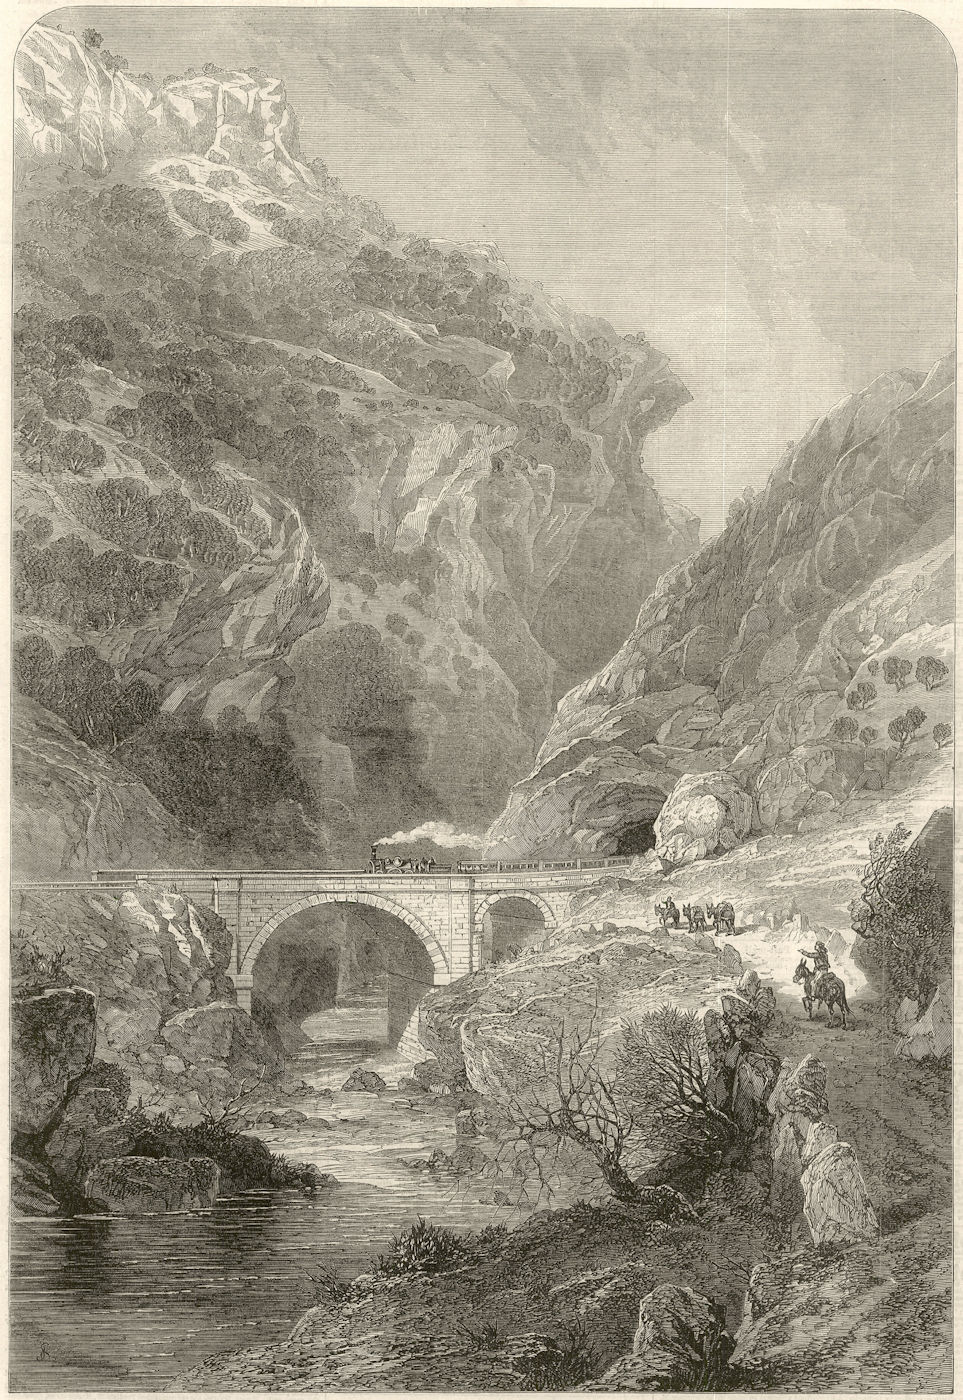 Associate Product The Bilbao - Tudela Railway, Spain: The Techas pass 1863 antique ILN full page